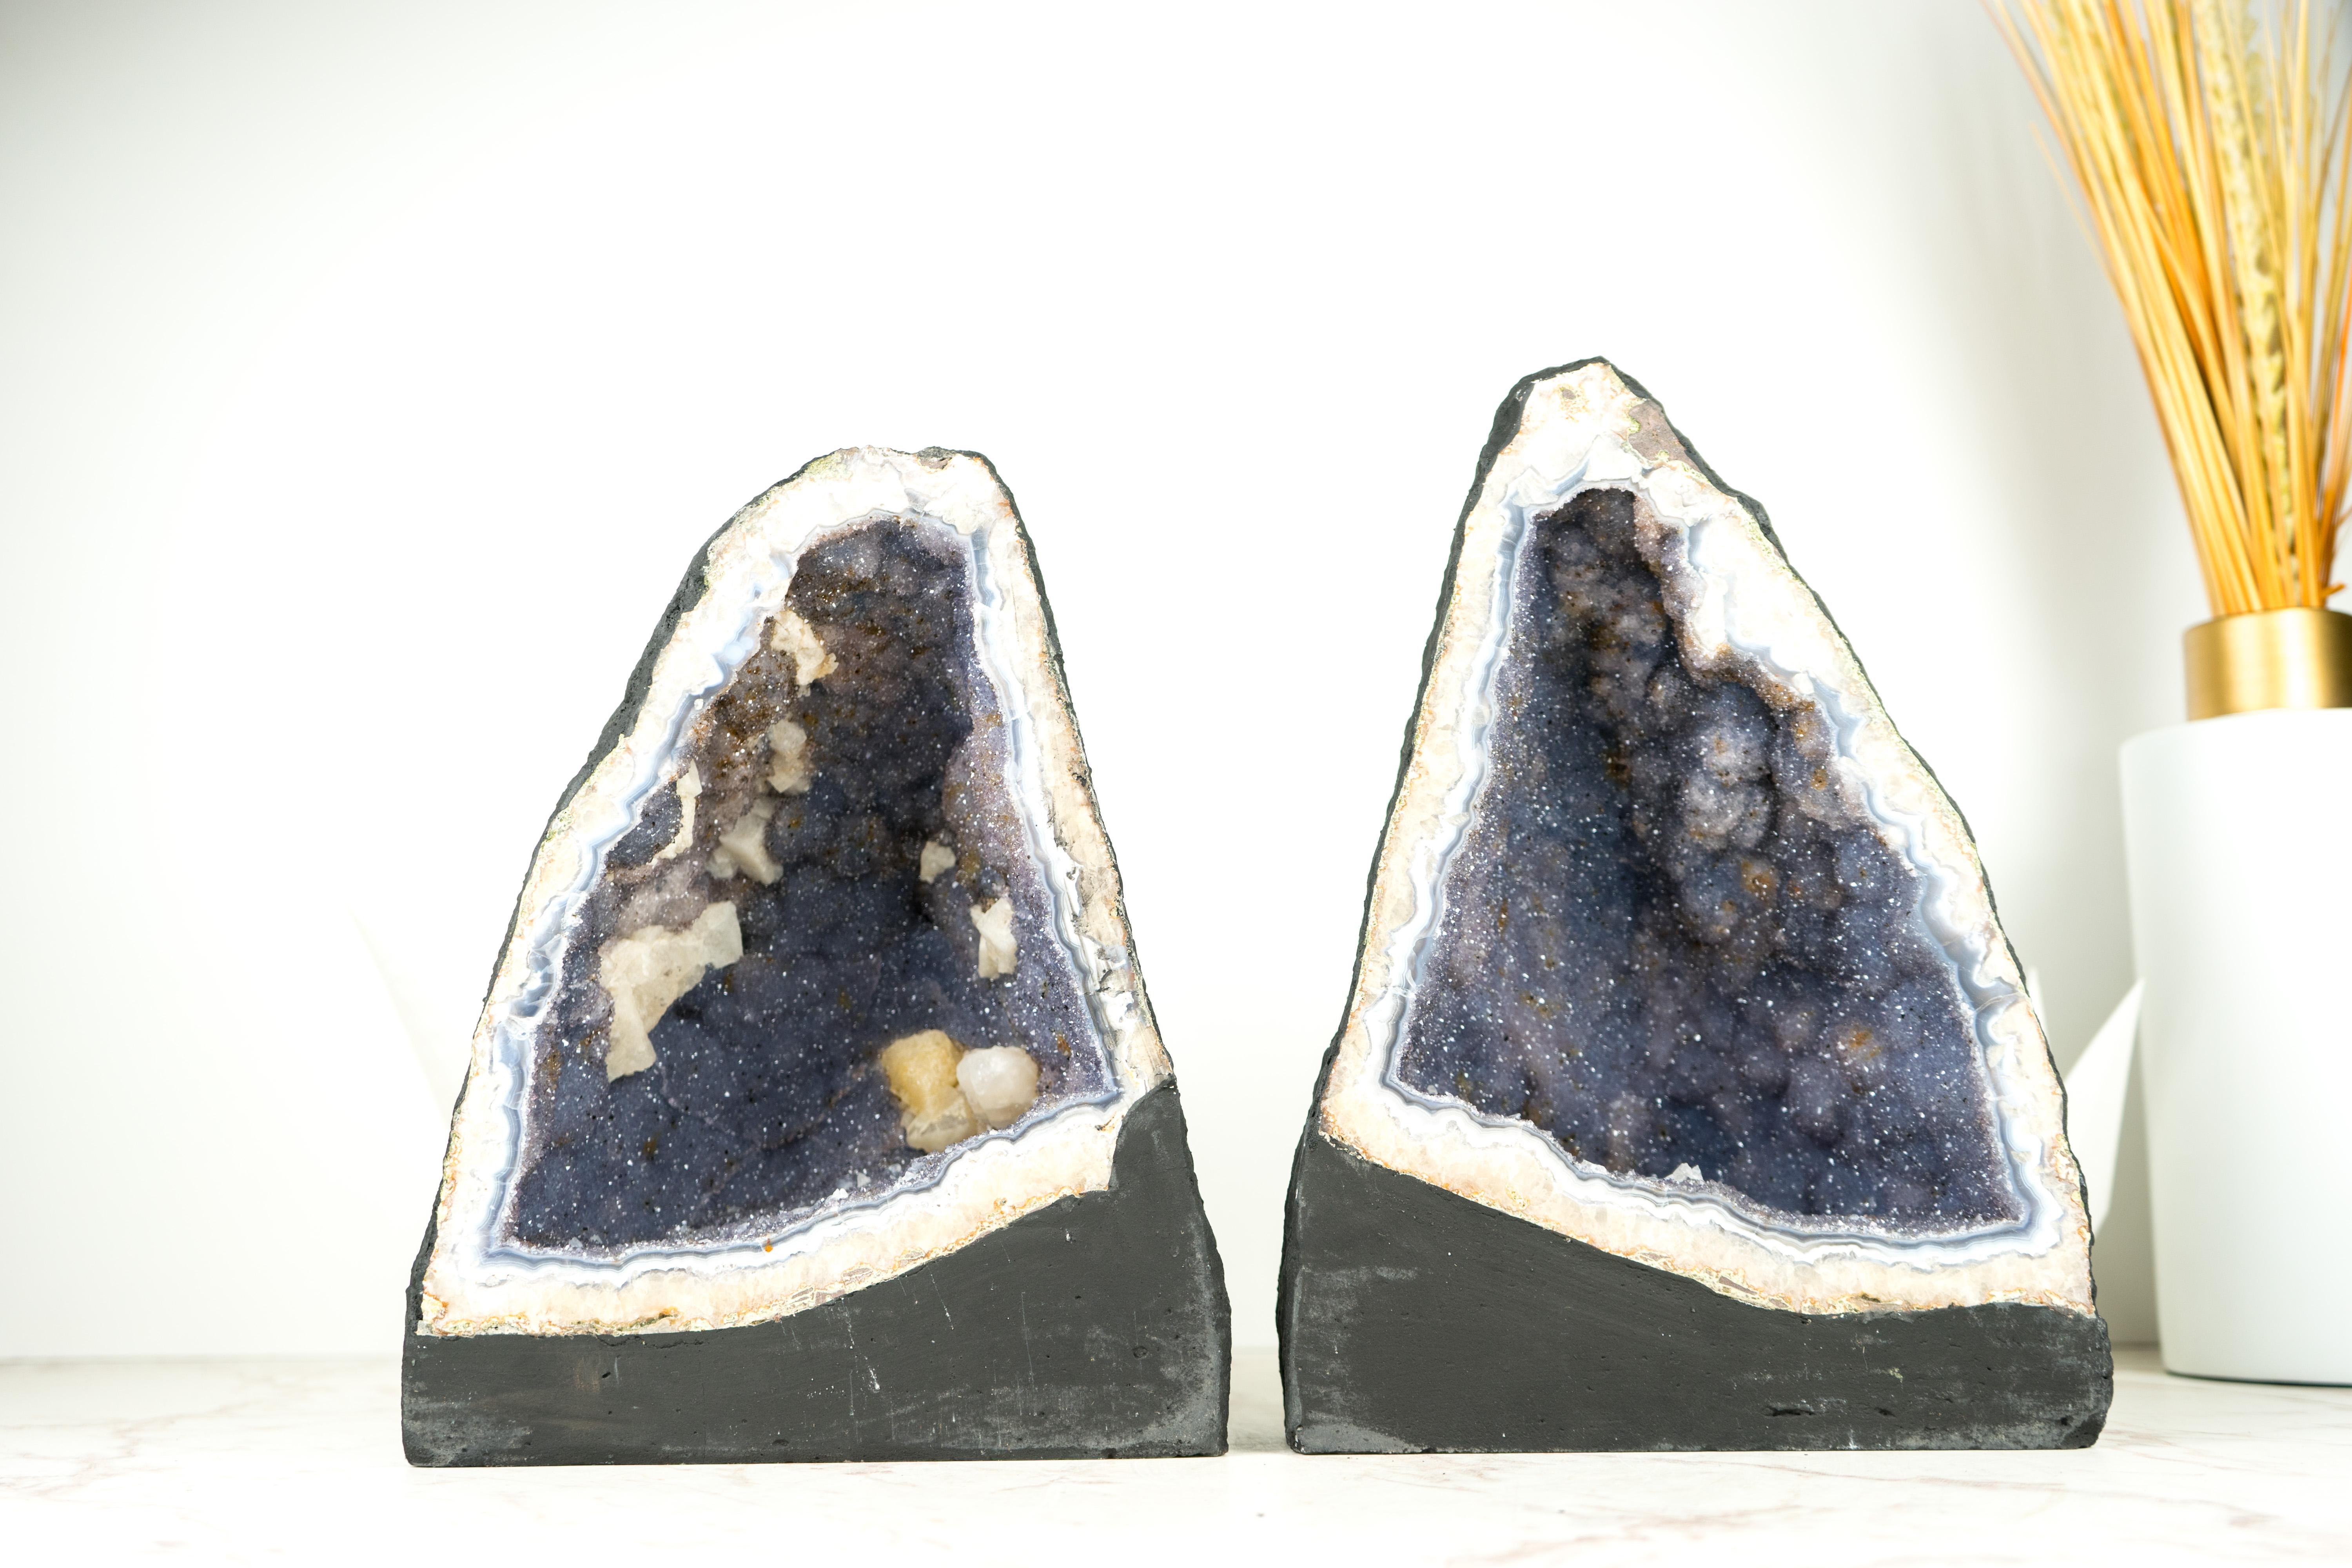 Pair of Blue Lace Agate Geodes with Lavender Amethyst Druzy, Rare Sparkly Geodes For Sale